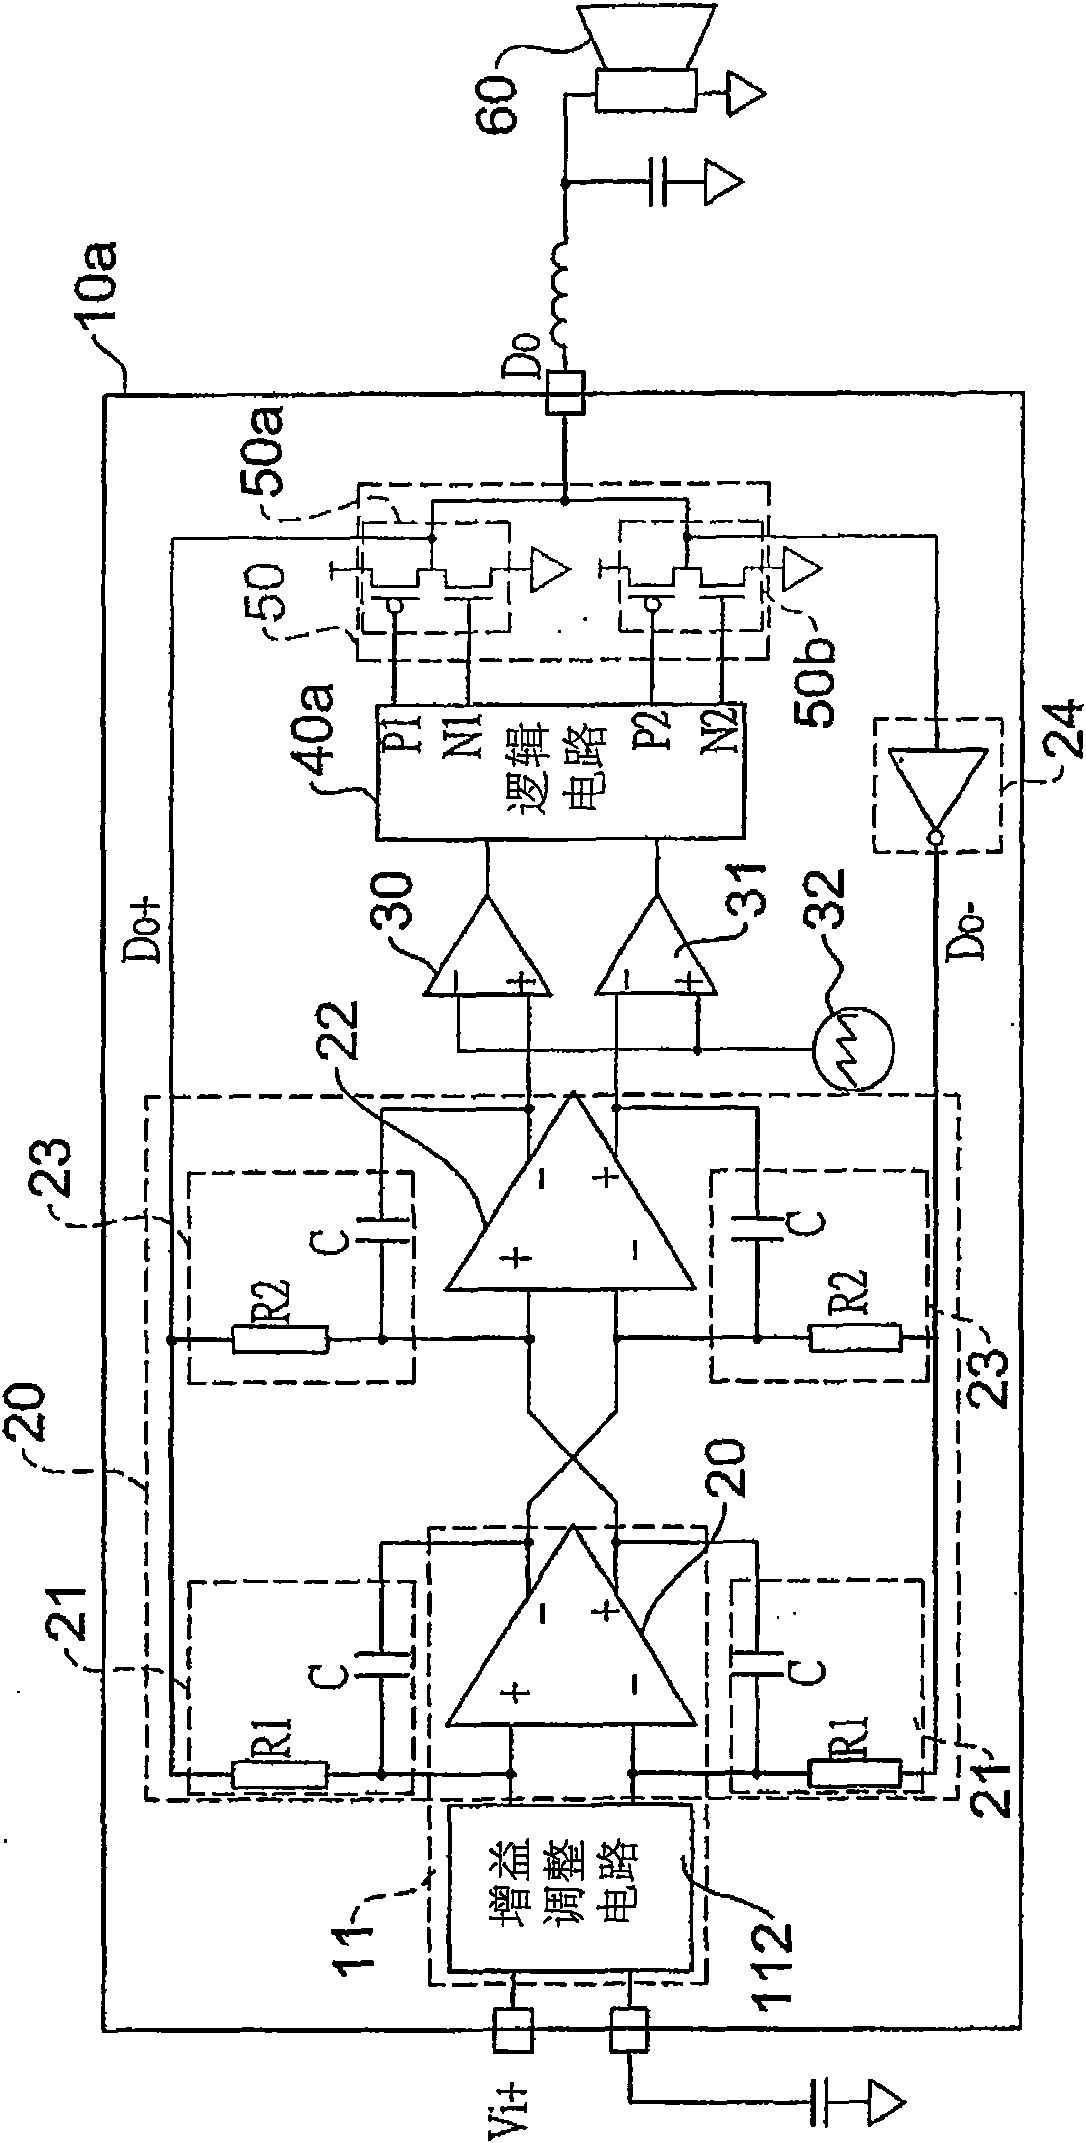 Ended output type D-class amplifier of double-feedback differential circuit